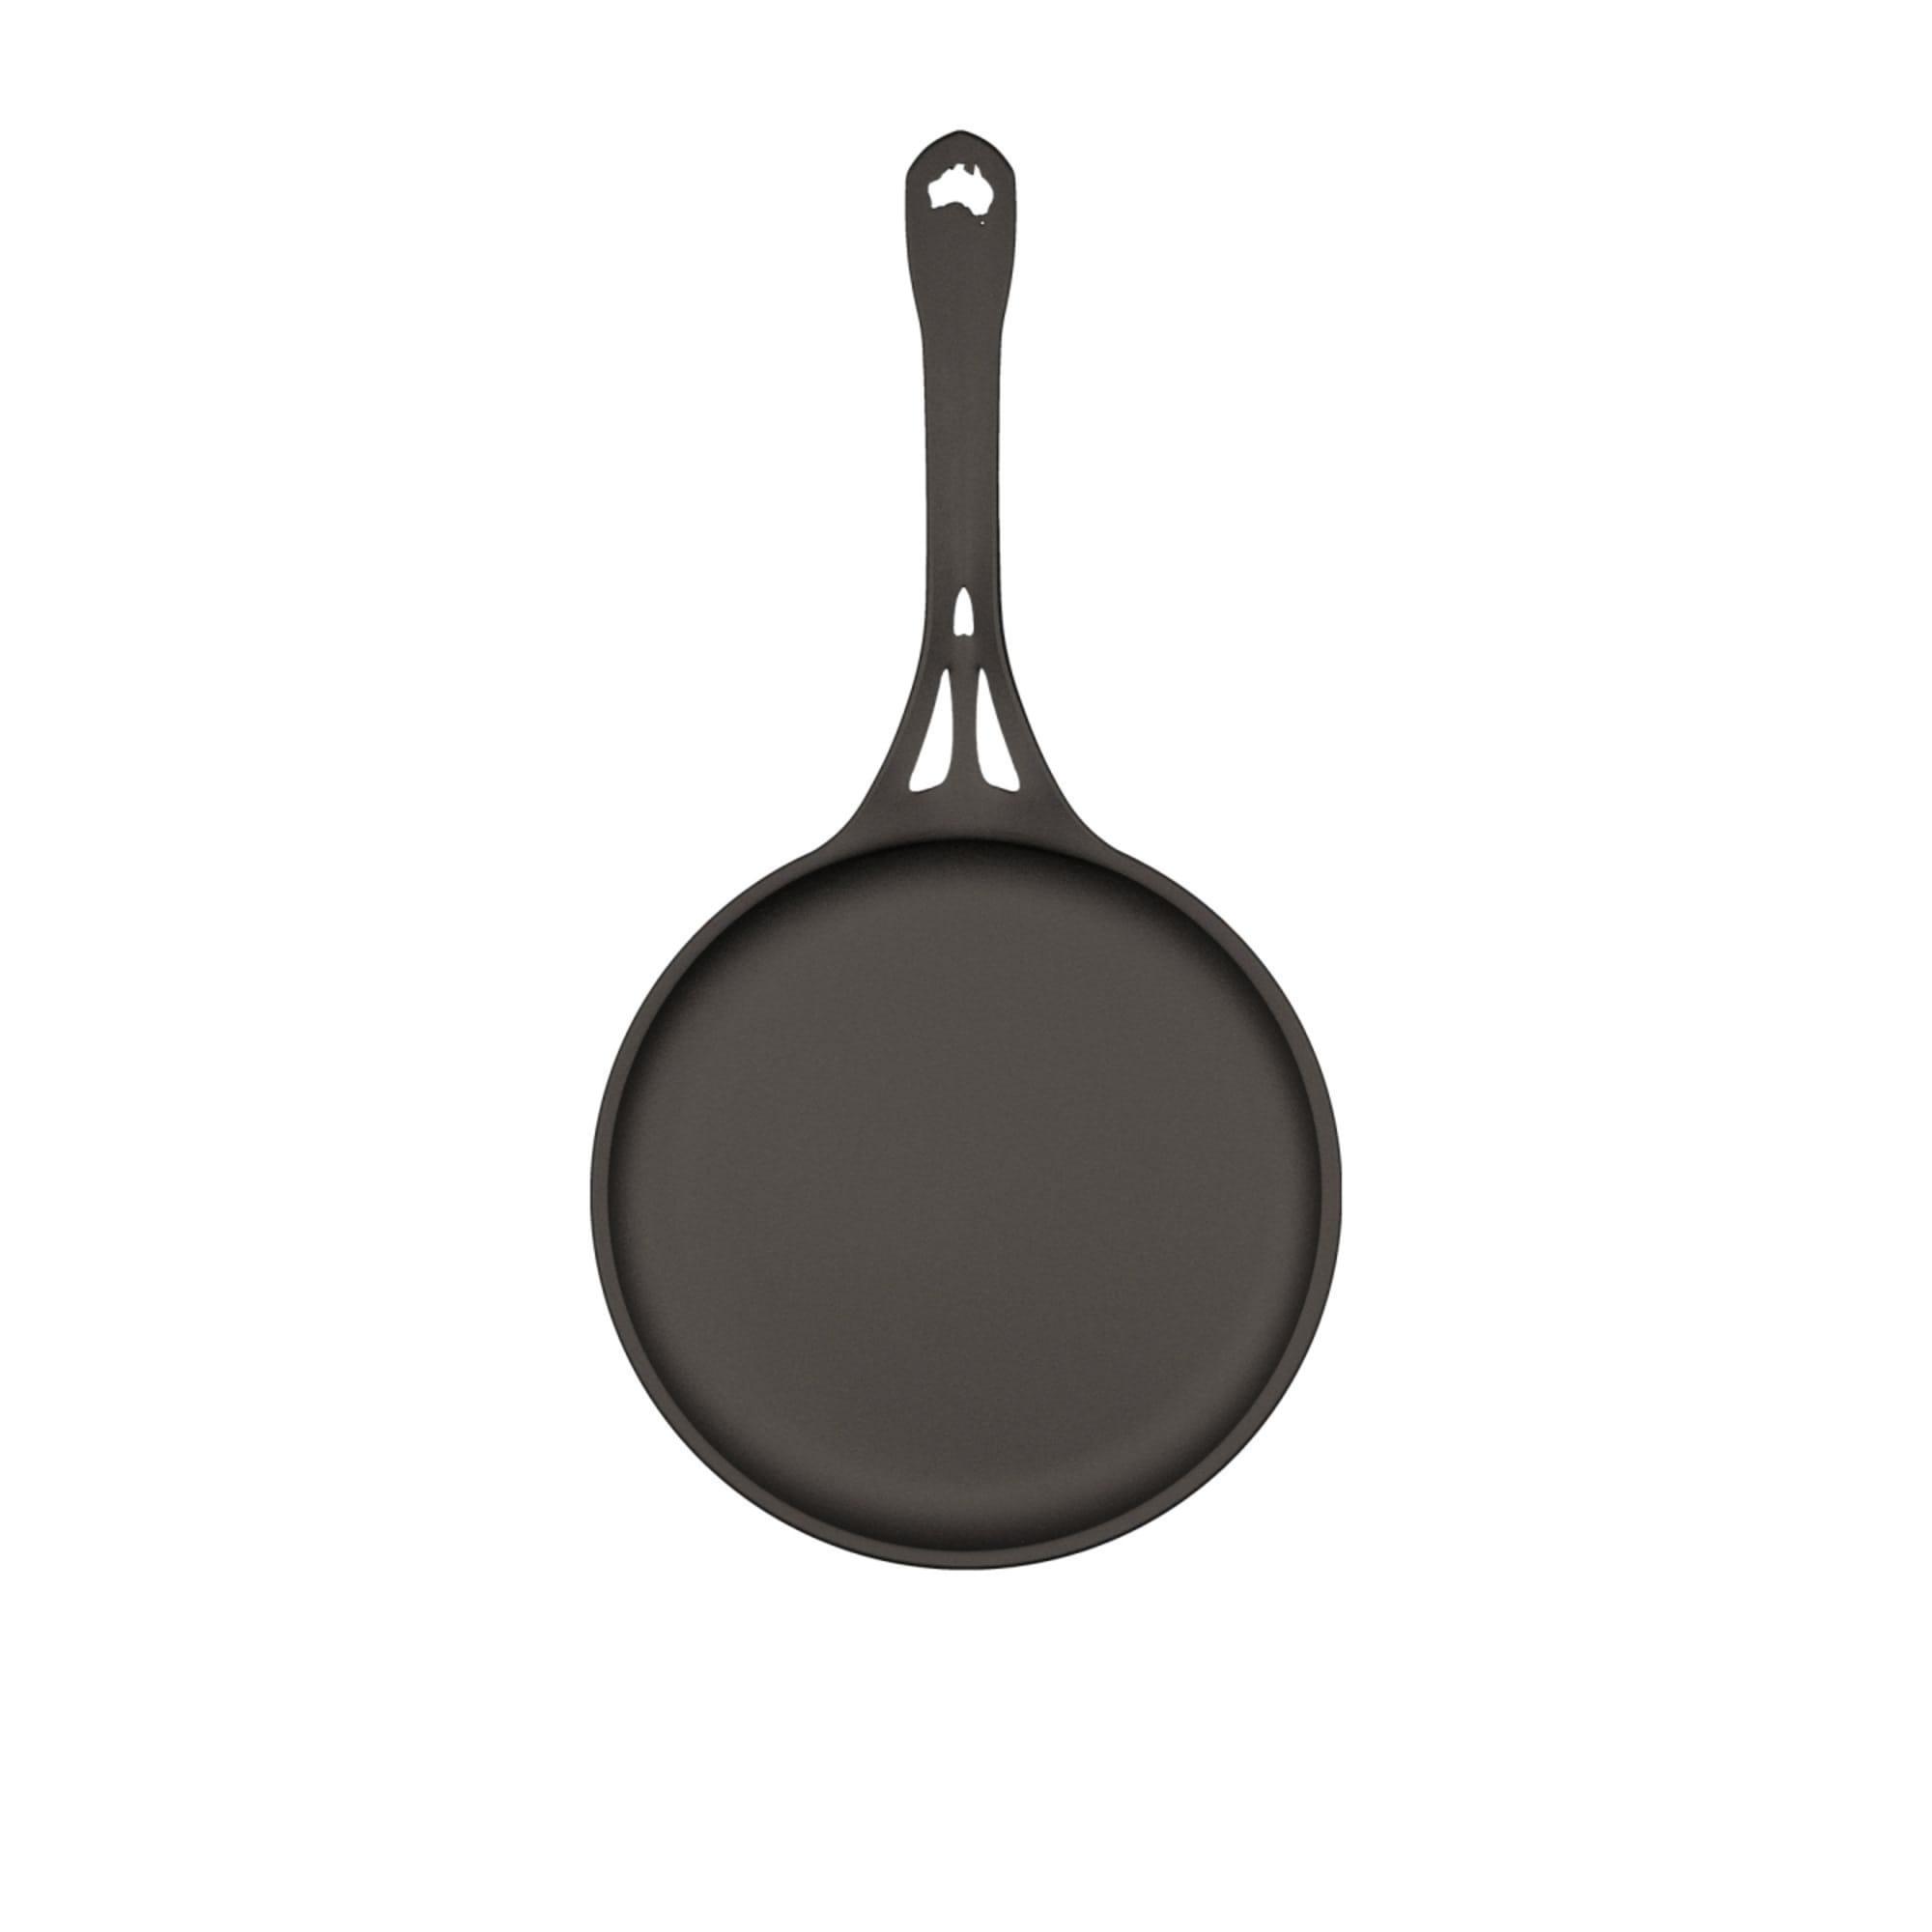 Solidteknics AUS-ION Crepe Pan with Quenched Finish 24cm Image 2